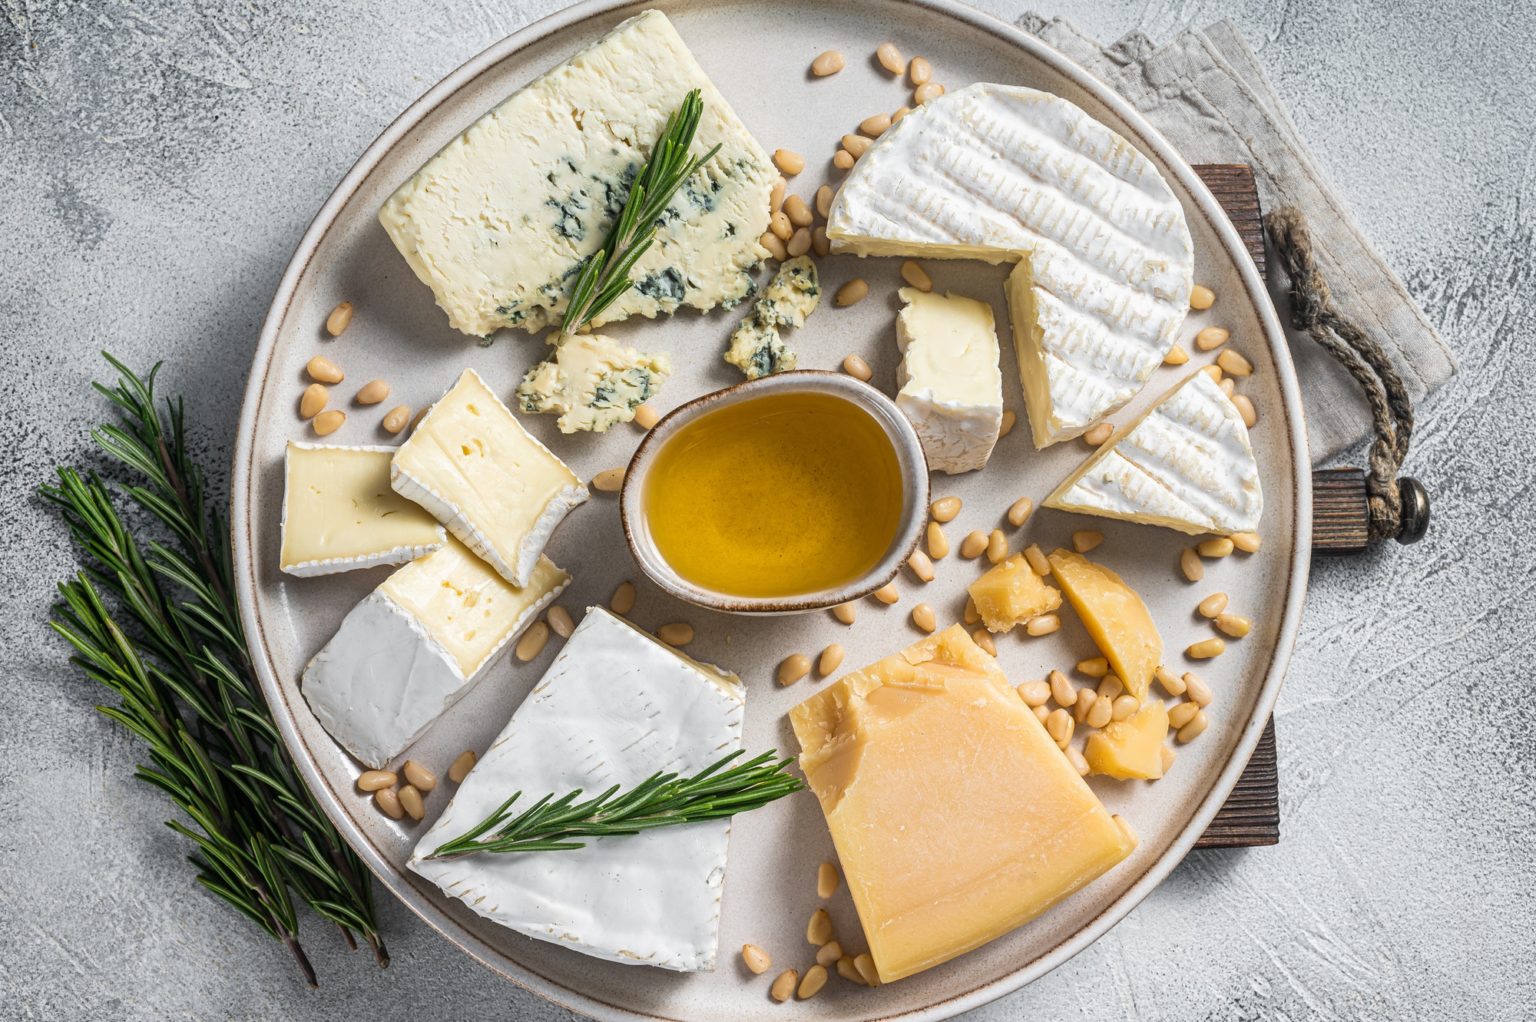 French Cheese platter with camembert, brie, Gorgonzola, parmesan, honey, nuts and herbs